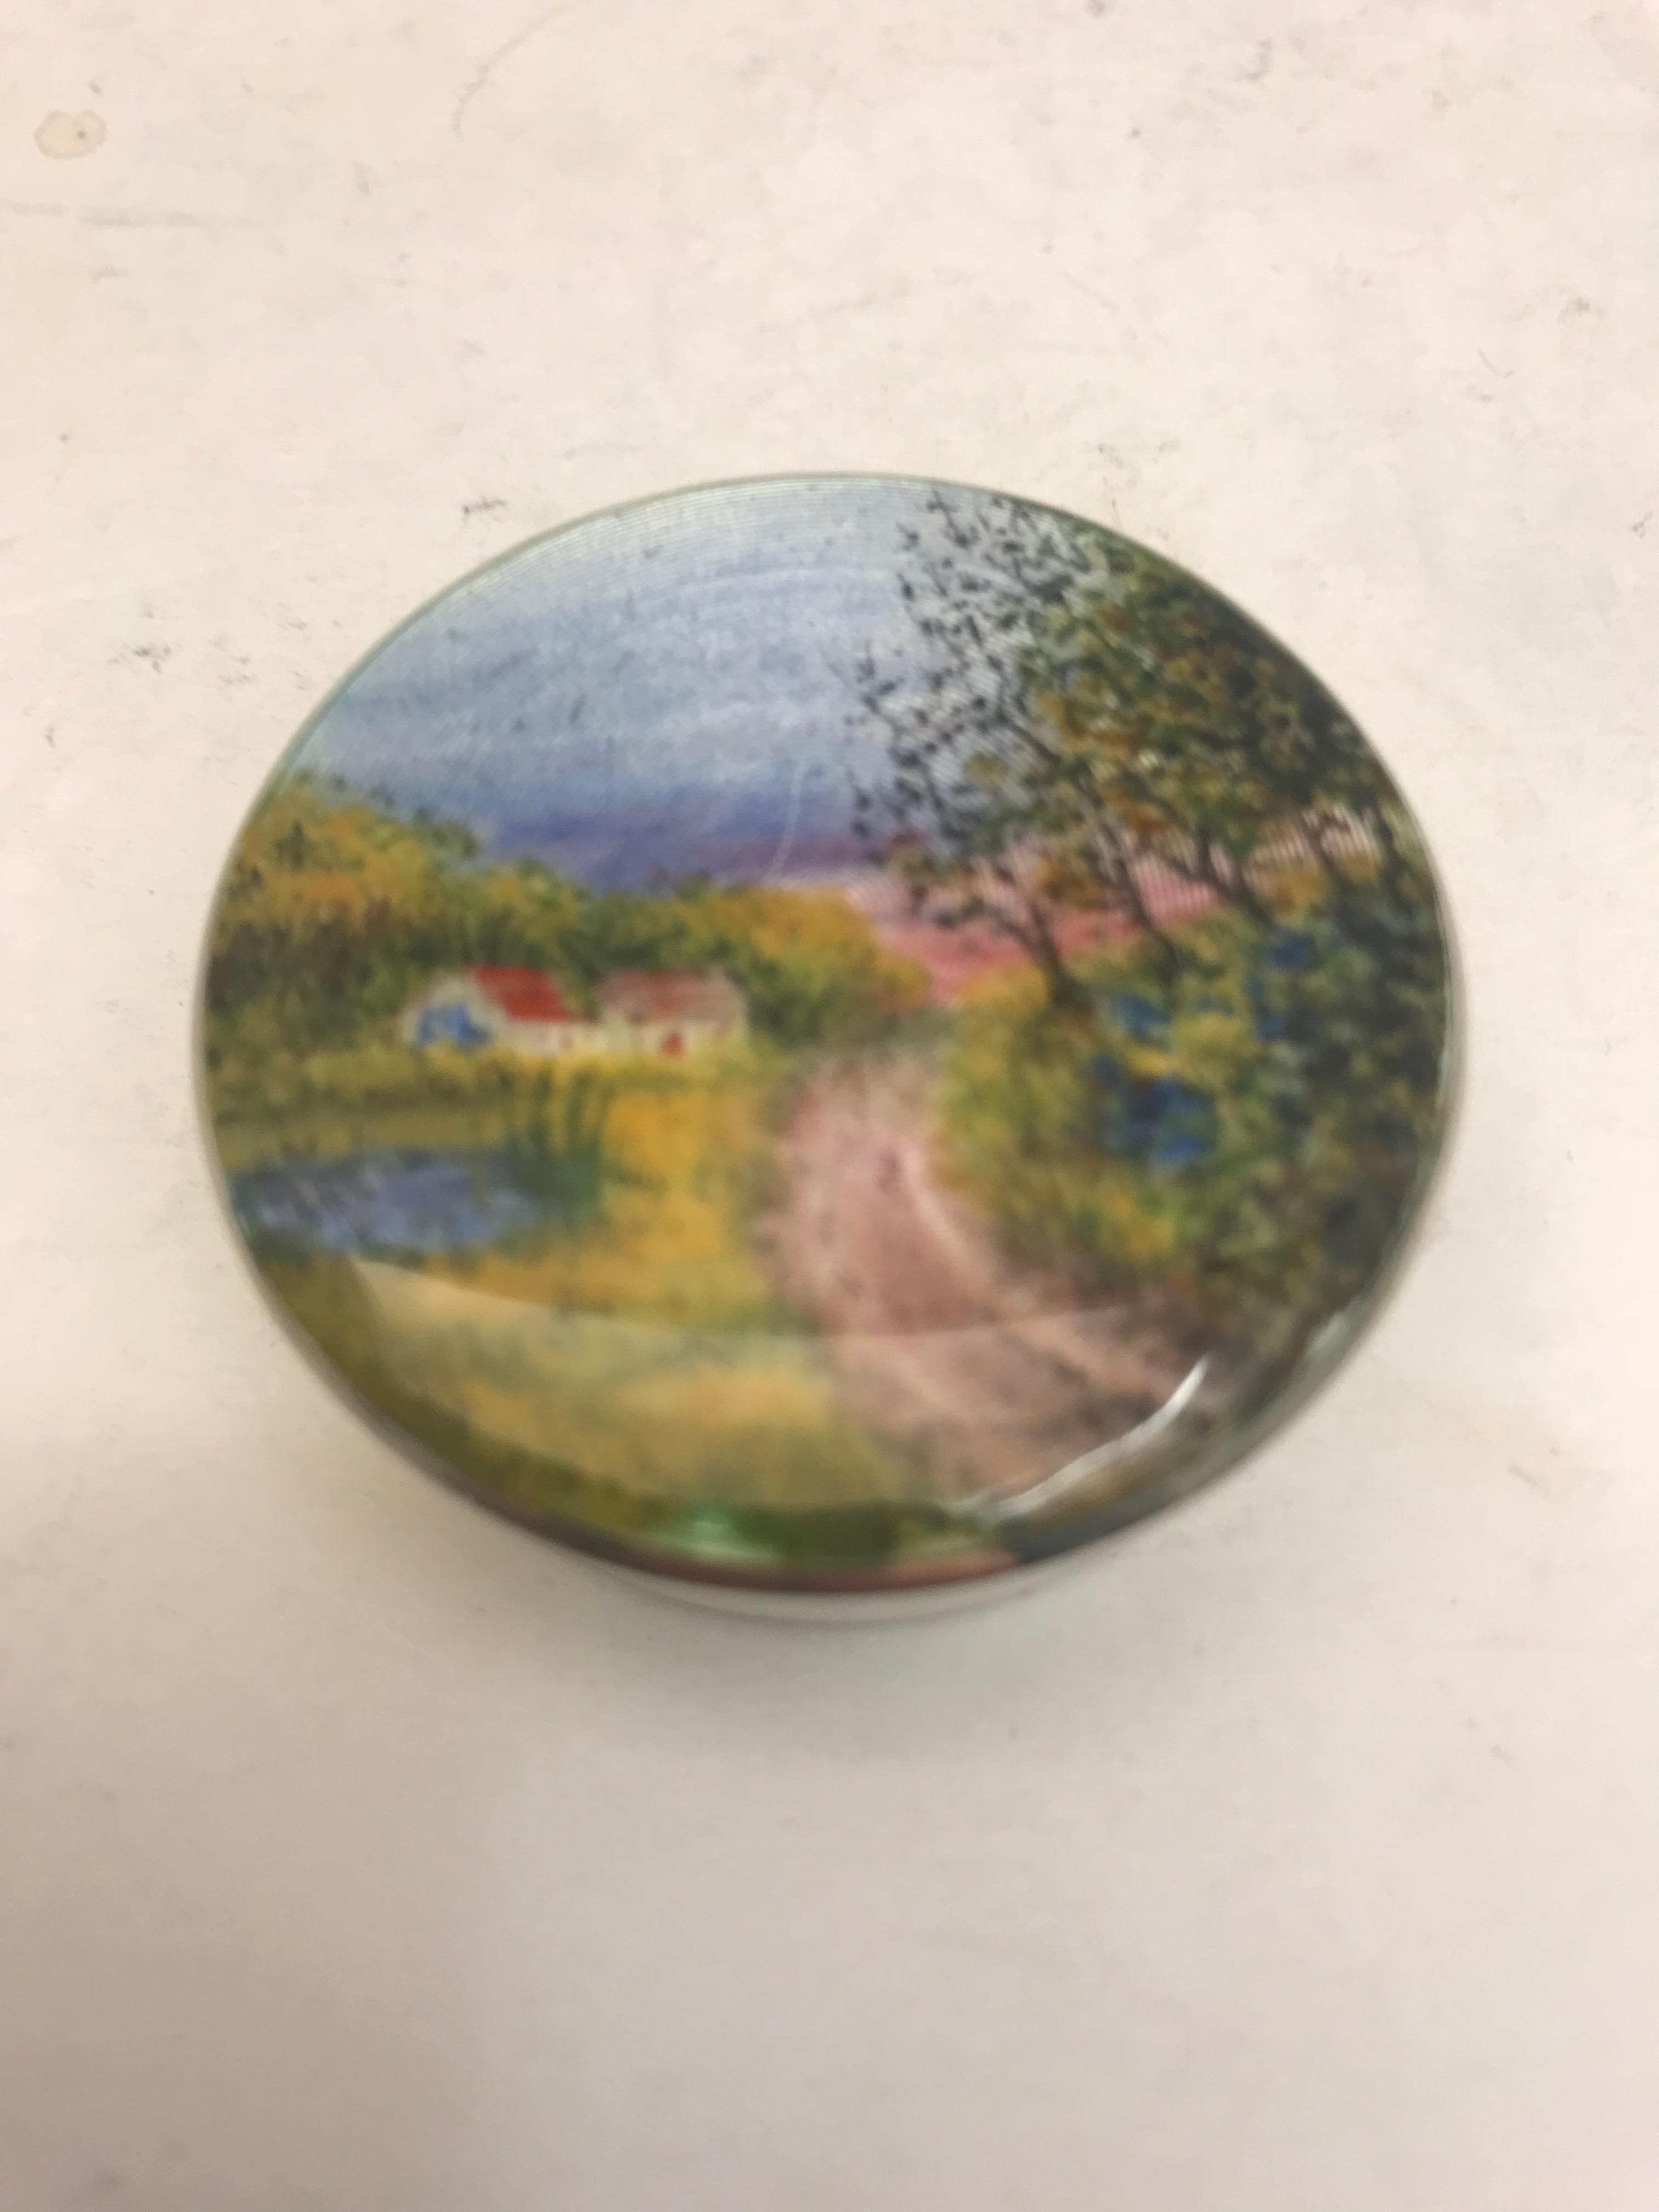 Art Deco Silver and Enamel Box with Country Scene on Lid